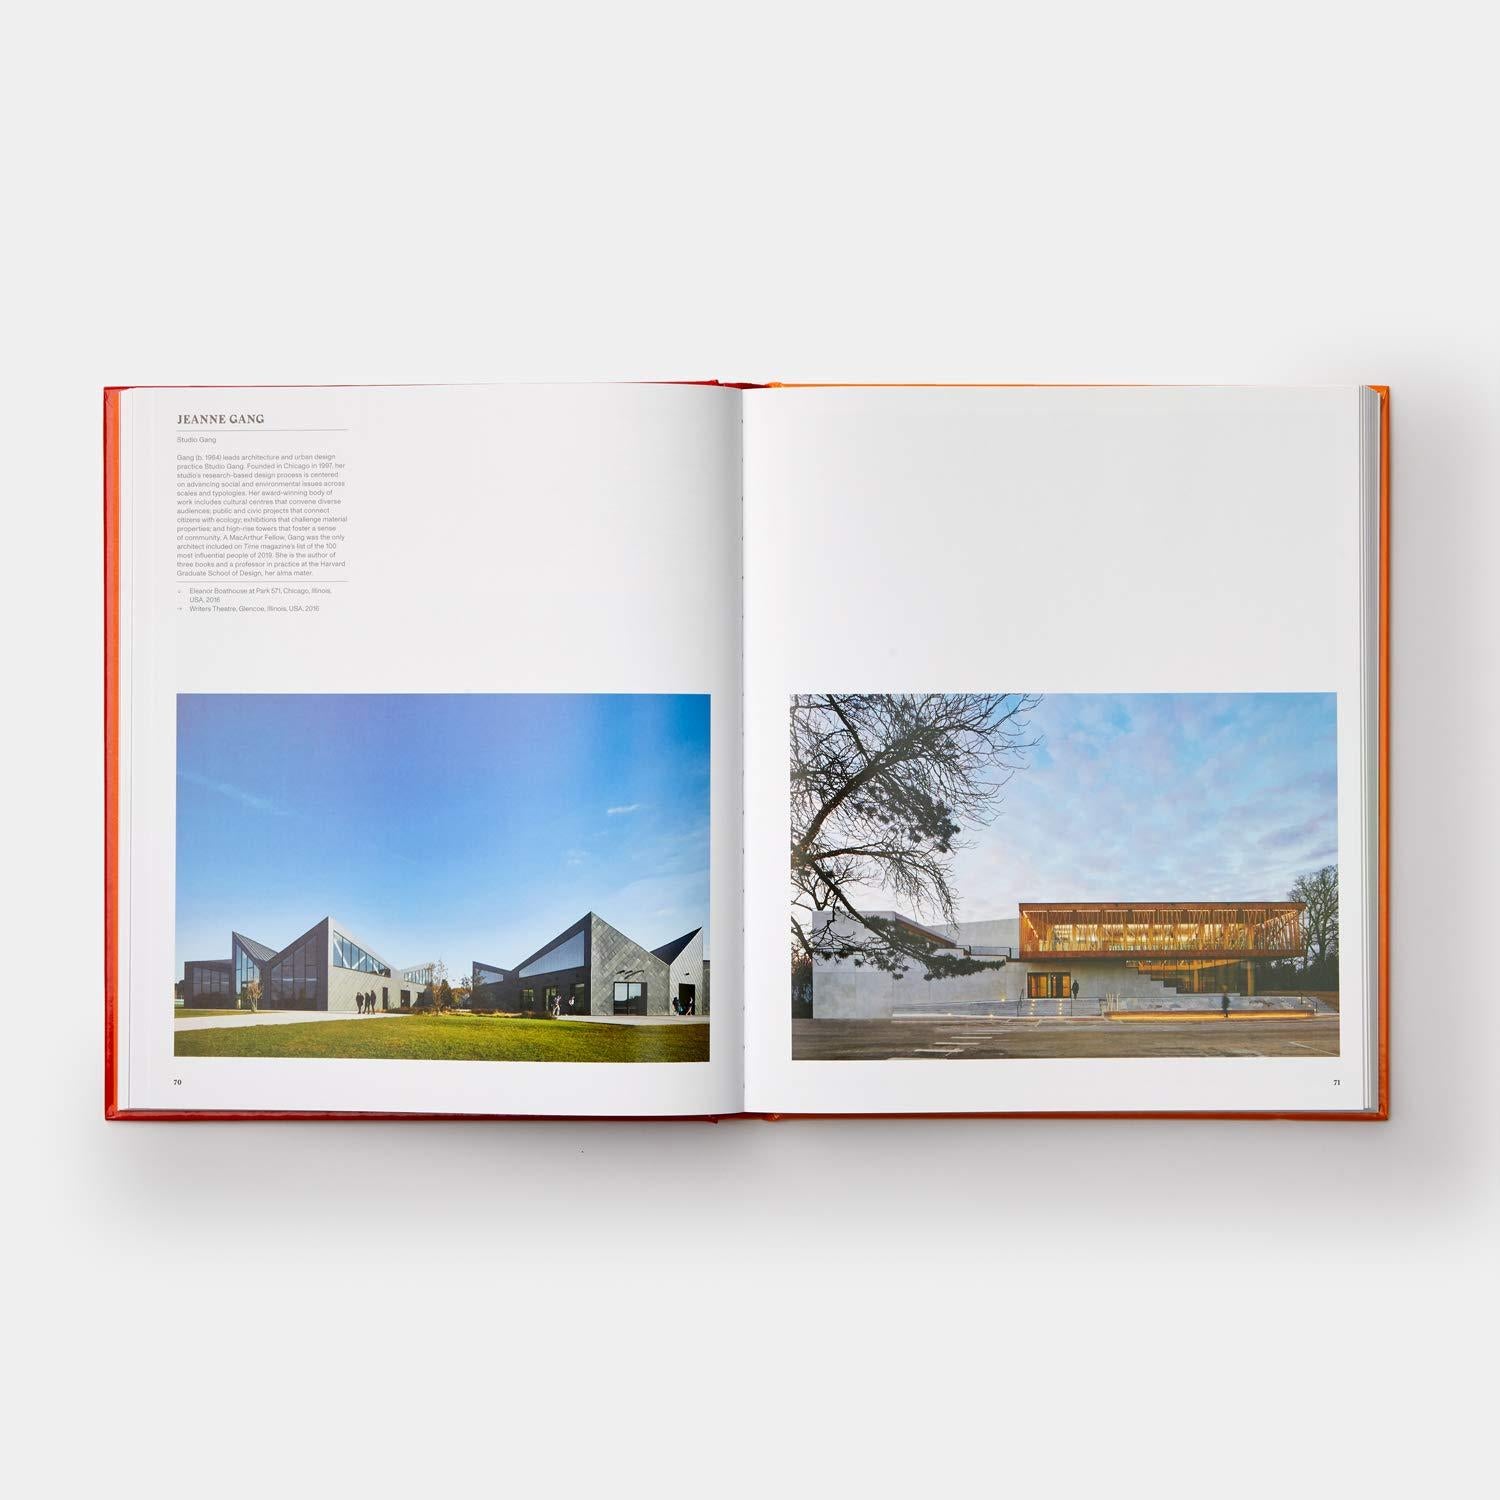 American In Stock in Los Angeles, Breaking Ground Architecture by Women, by Jane Hall